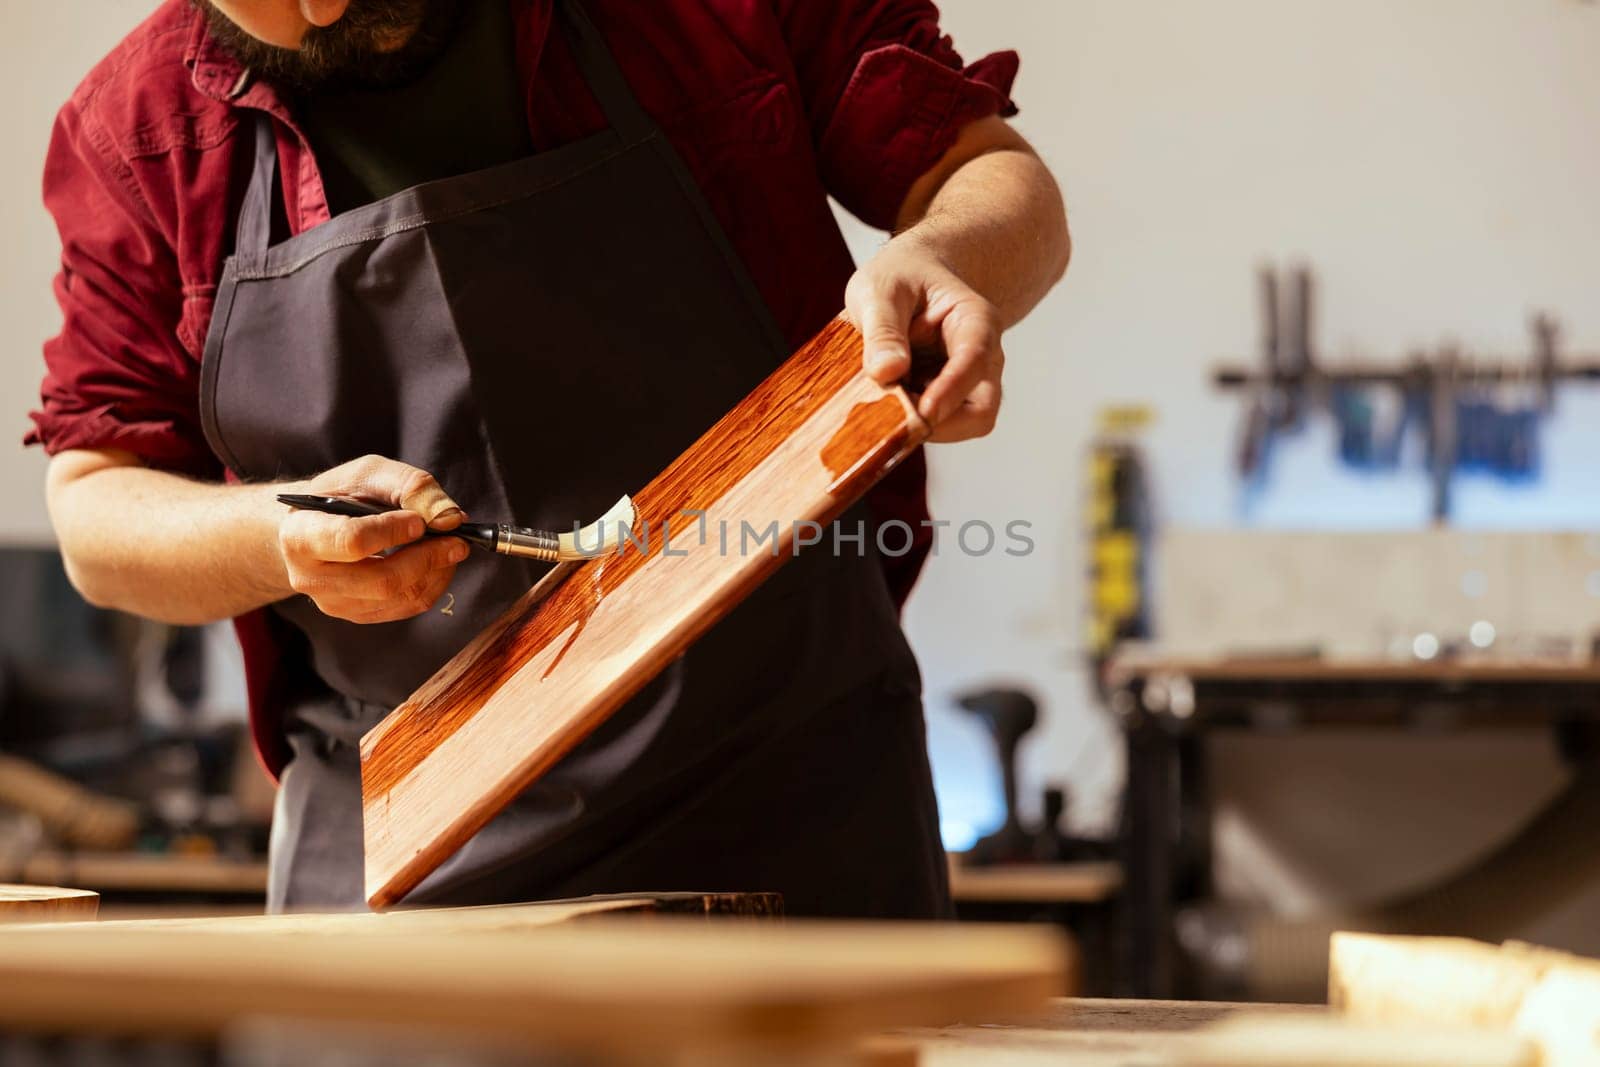 Carpenter applying wax on wooden surface to prevent damage by DCStudio